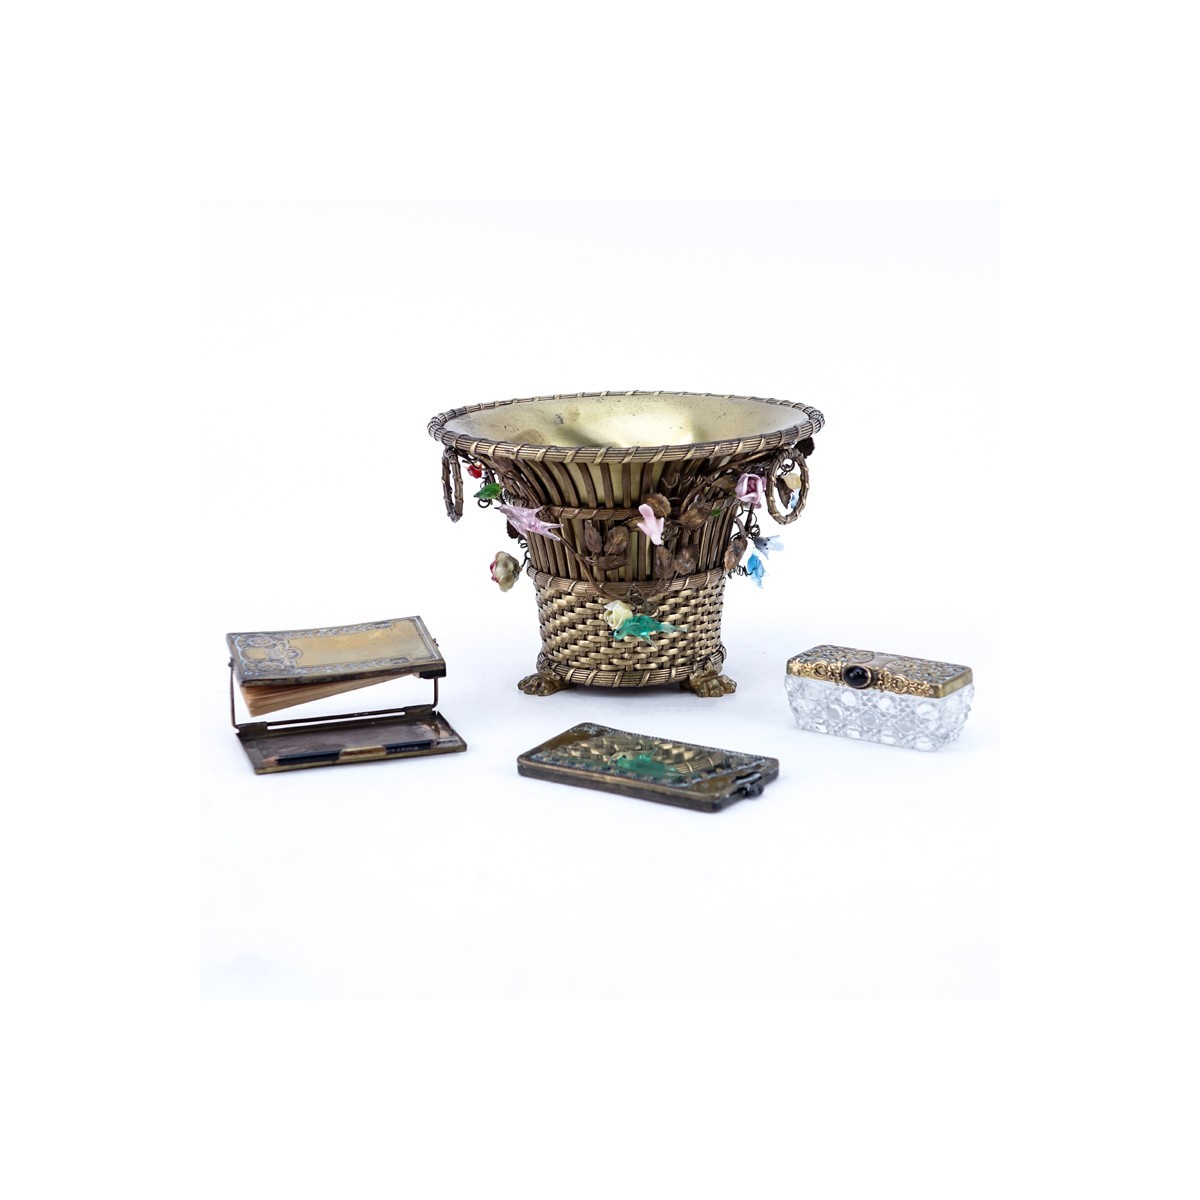 Grouping of Four (4): French Gilt Brass Vase with Porcelain Flowers and Glass Birds Accents, German Art Nouveau Gilt Brass Miniature Note Pad, Art Nouveau Gilt Brass and Glass Box, Art Nouveau Miniature Brush with Mirror Case. Note pad is marked 'Germany'